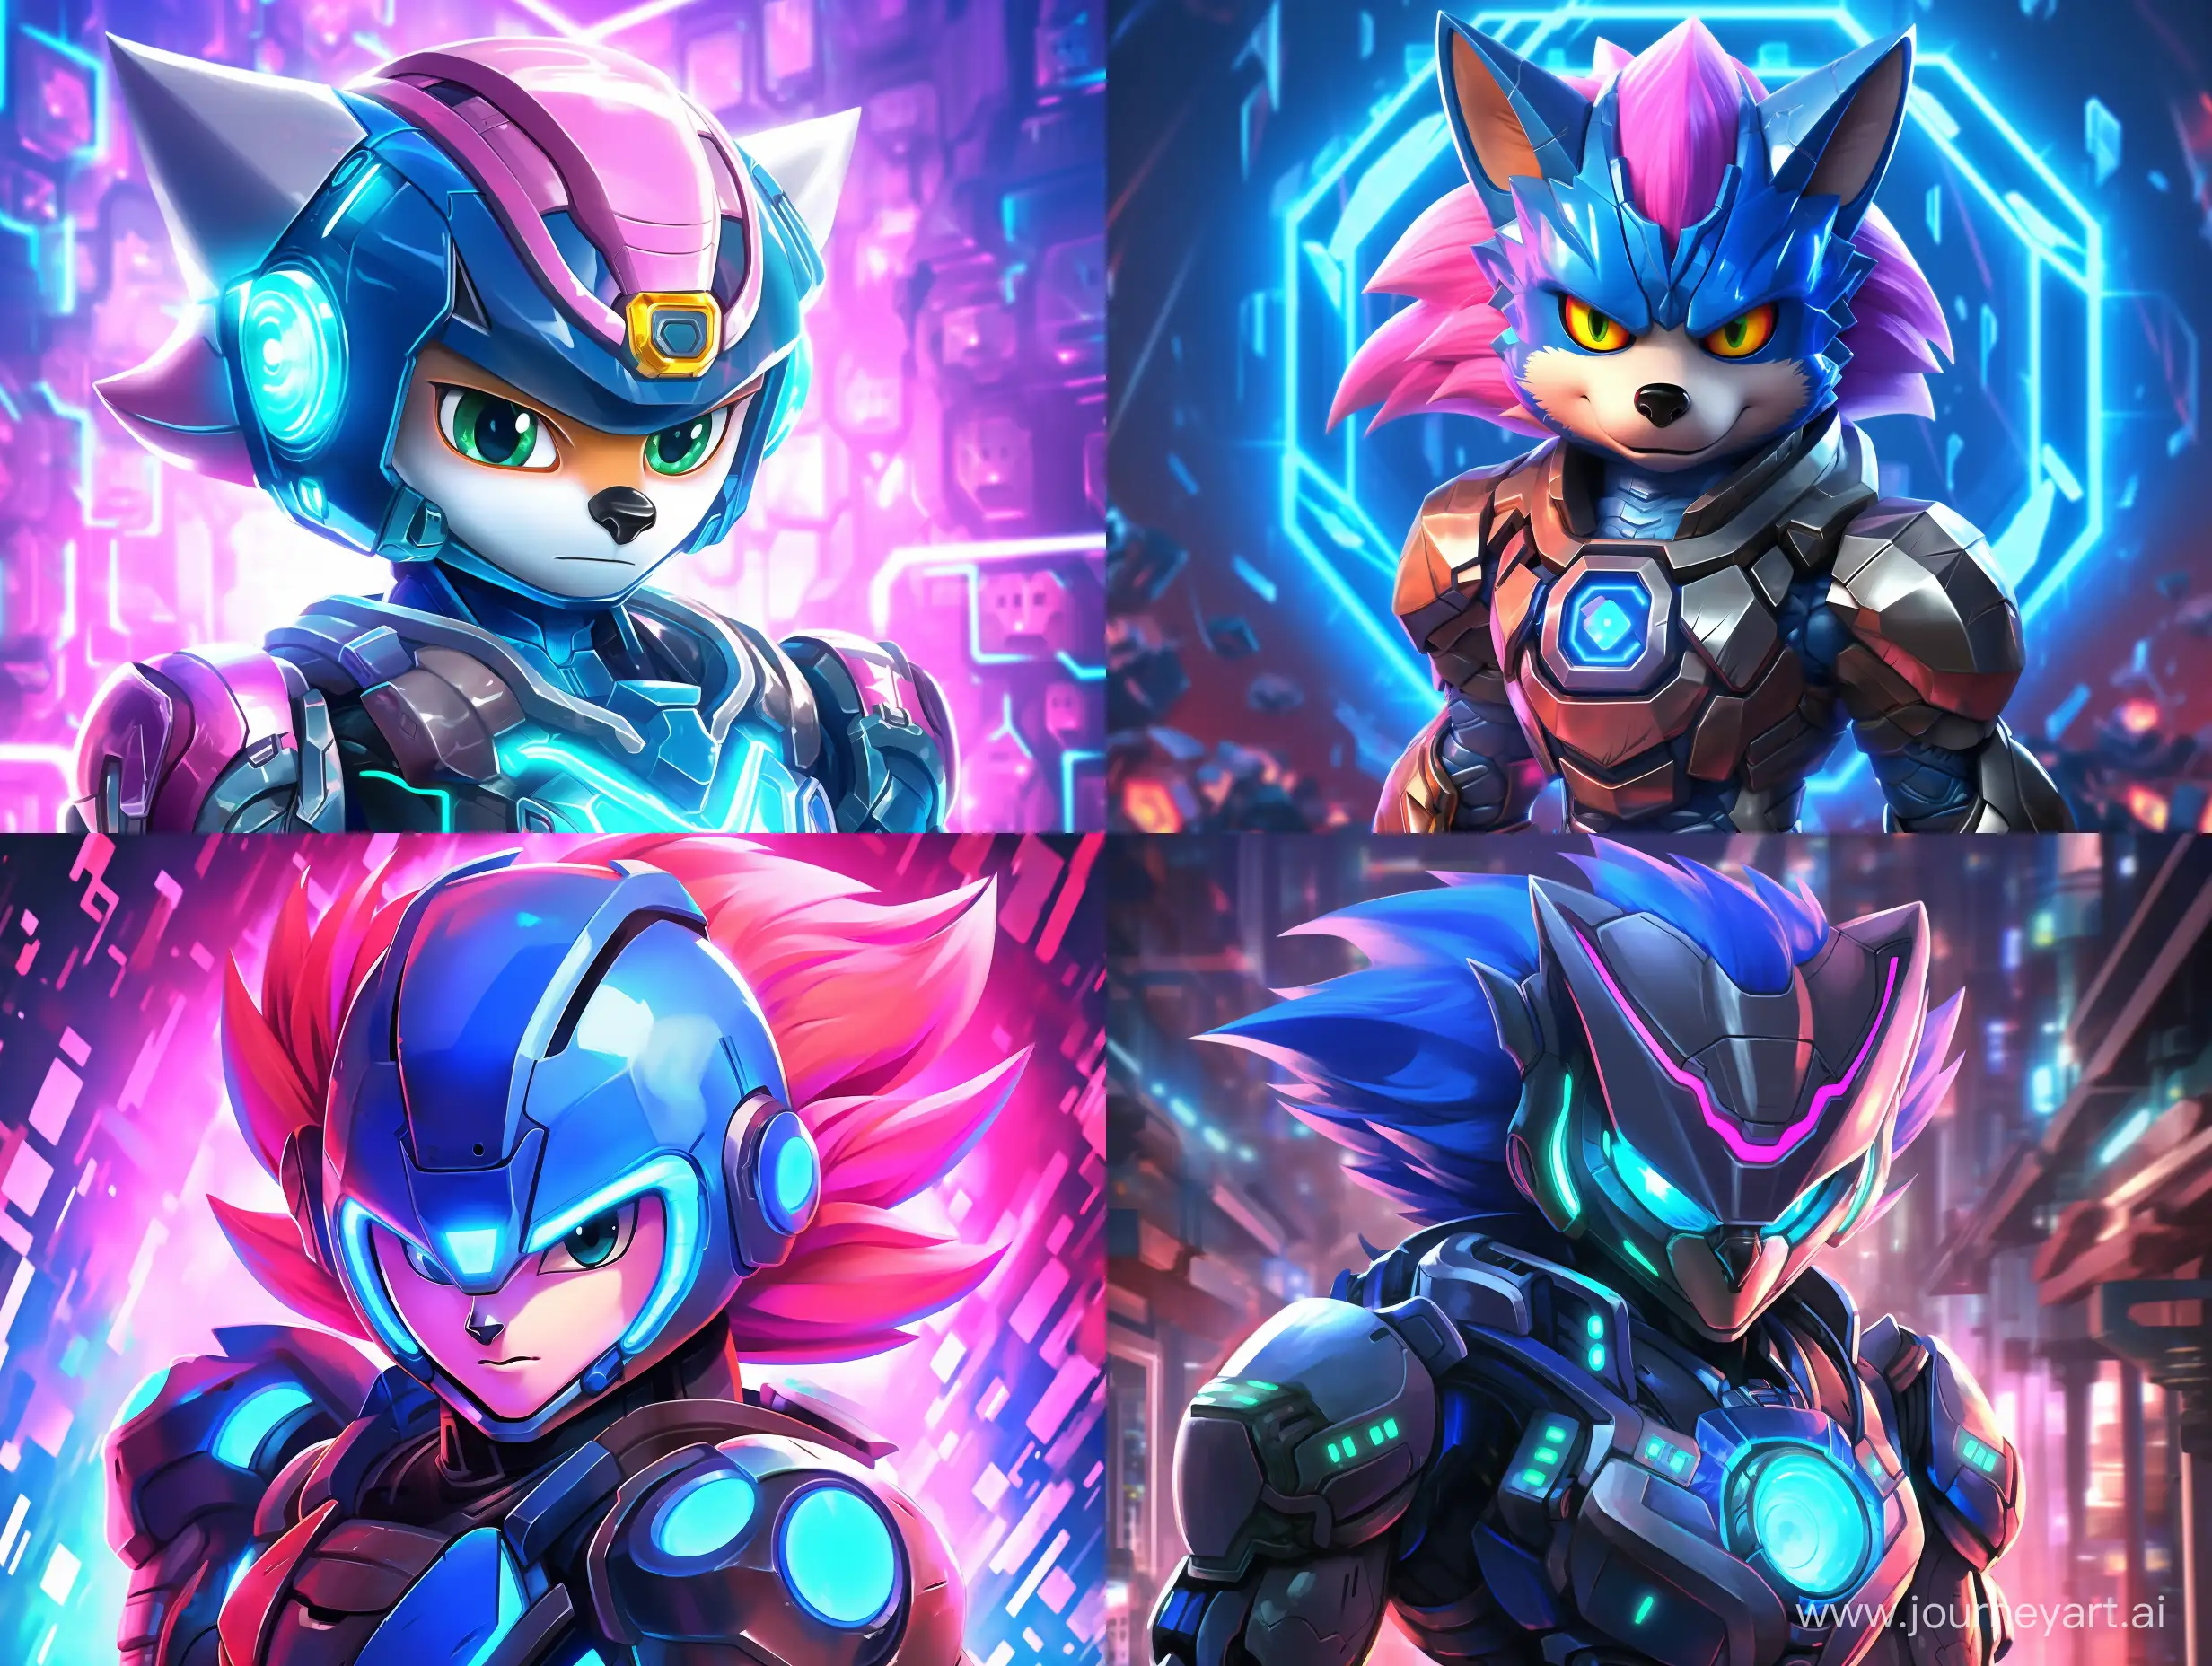 i need a new version of sonic the hedgehog, technologic, cyborg looks, with a gradient color of green - blue and a light pink, a blockchain background